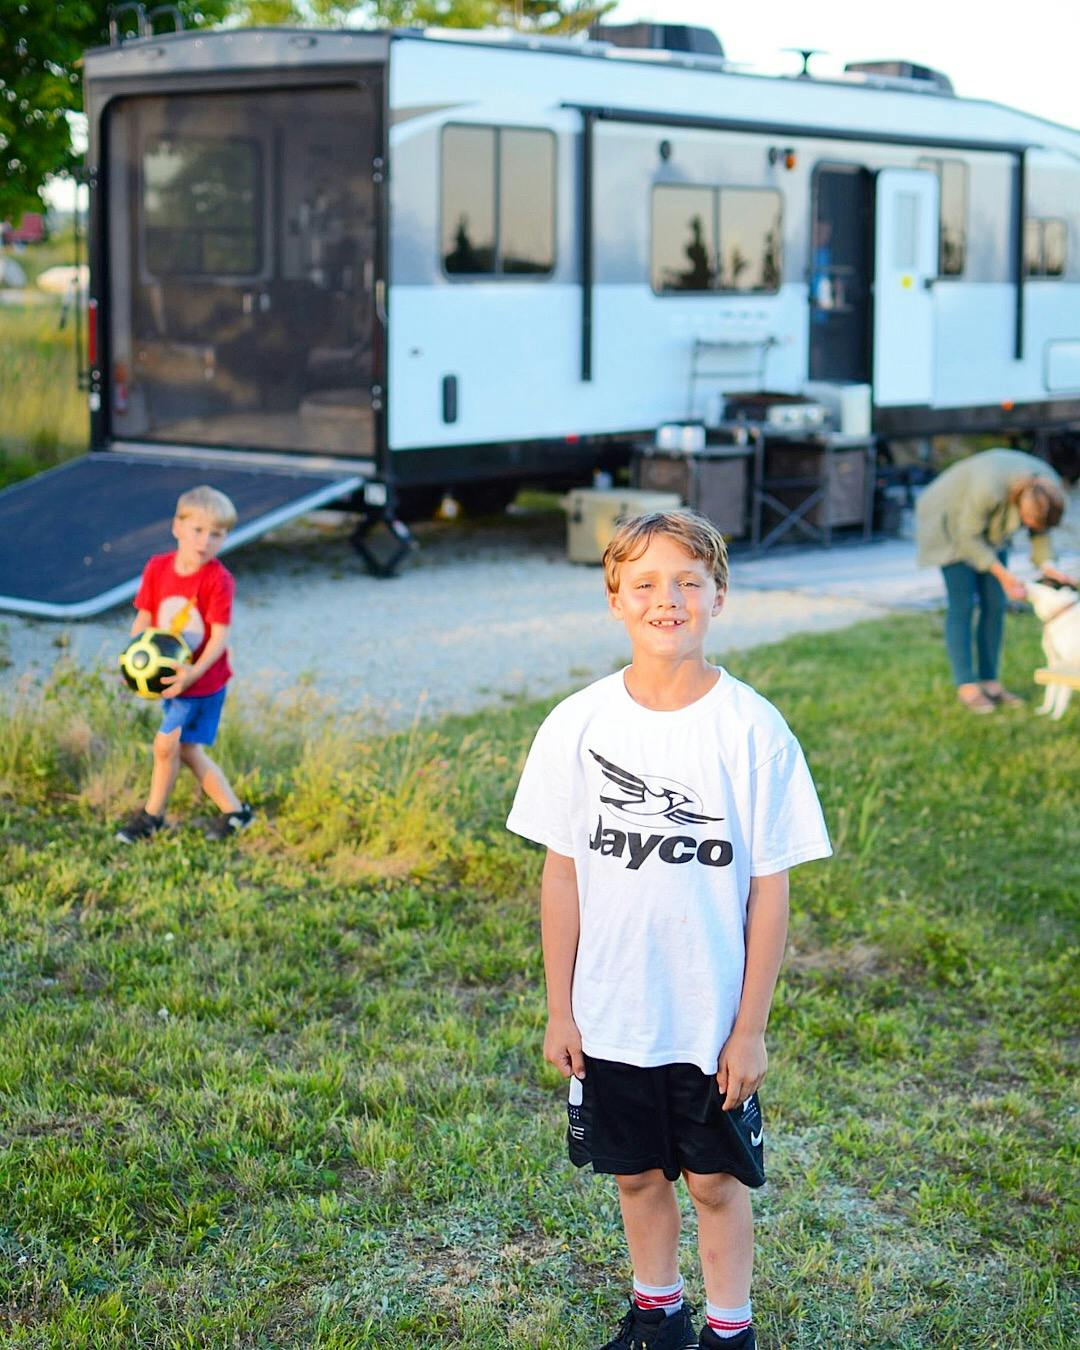 8 Tips for Taking Your Kids on Their First Camping Trip